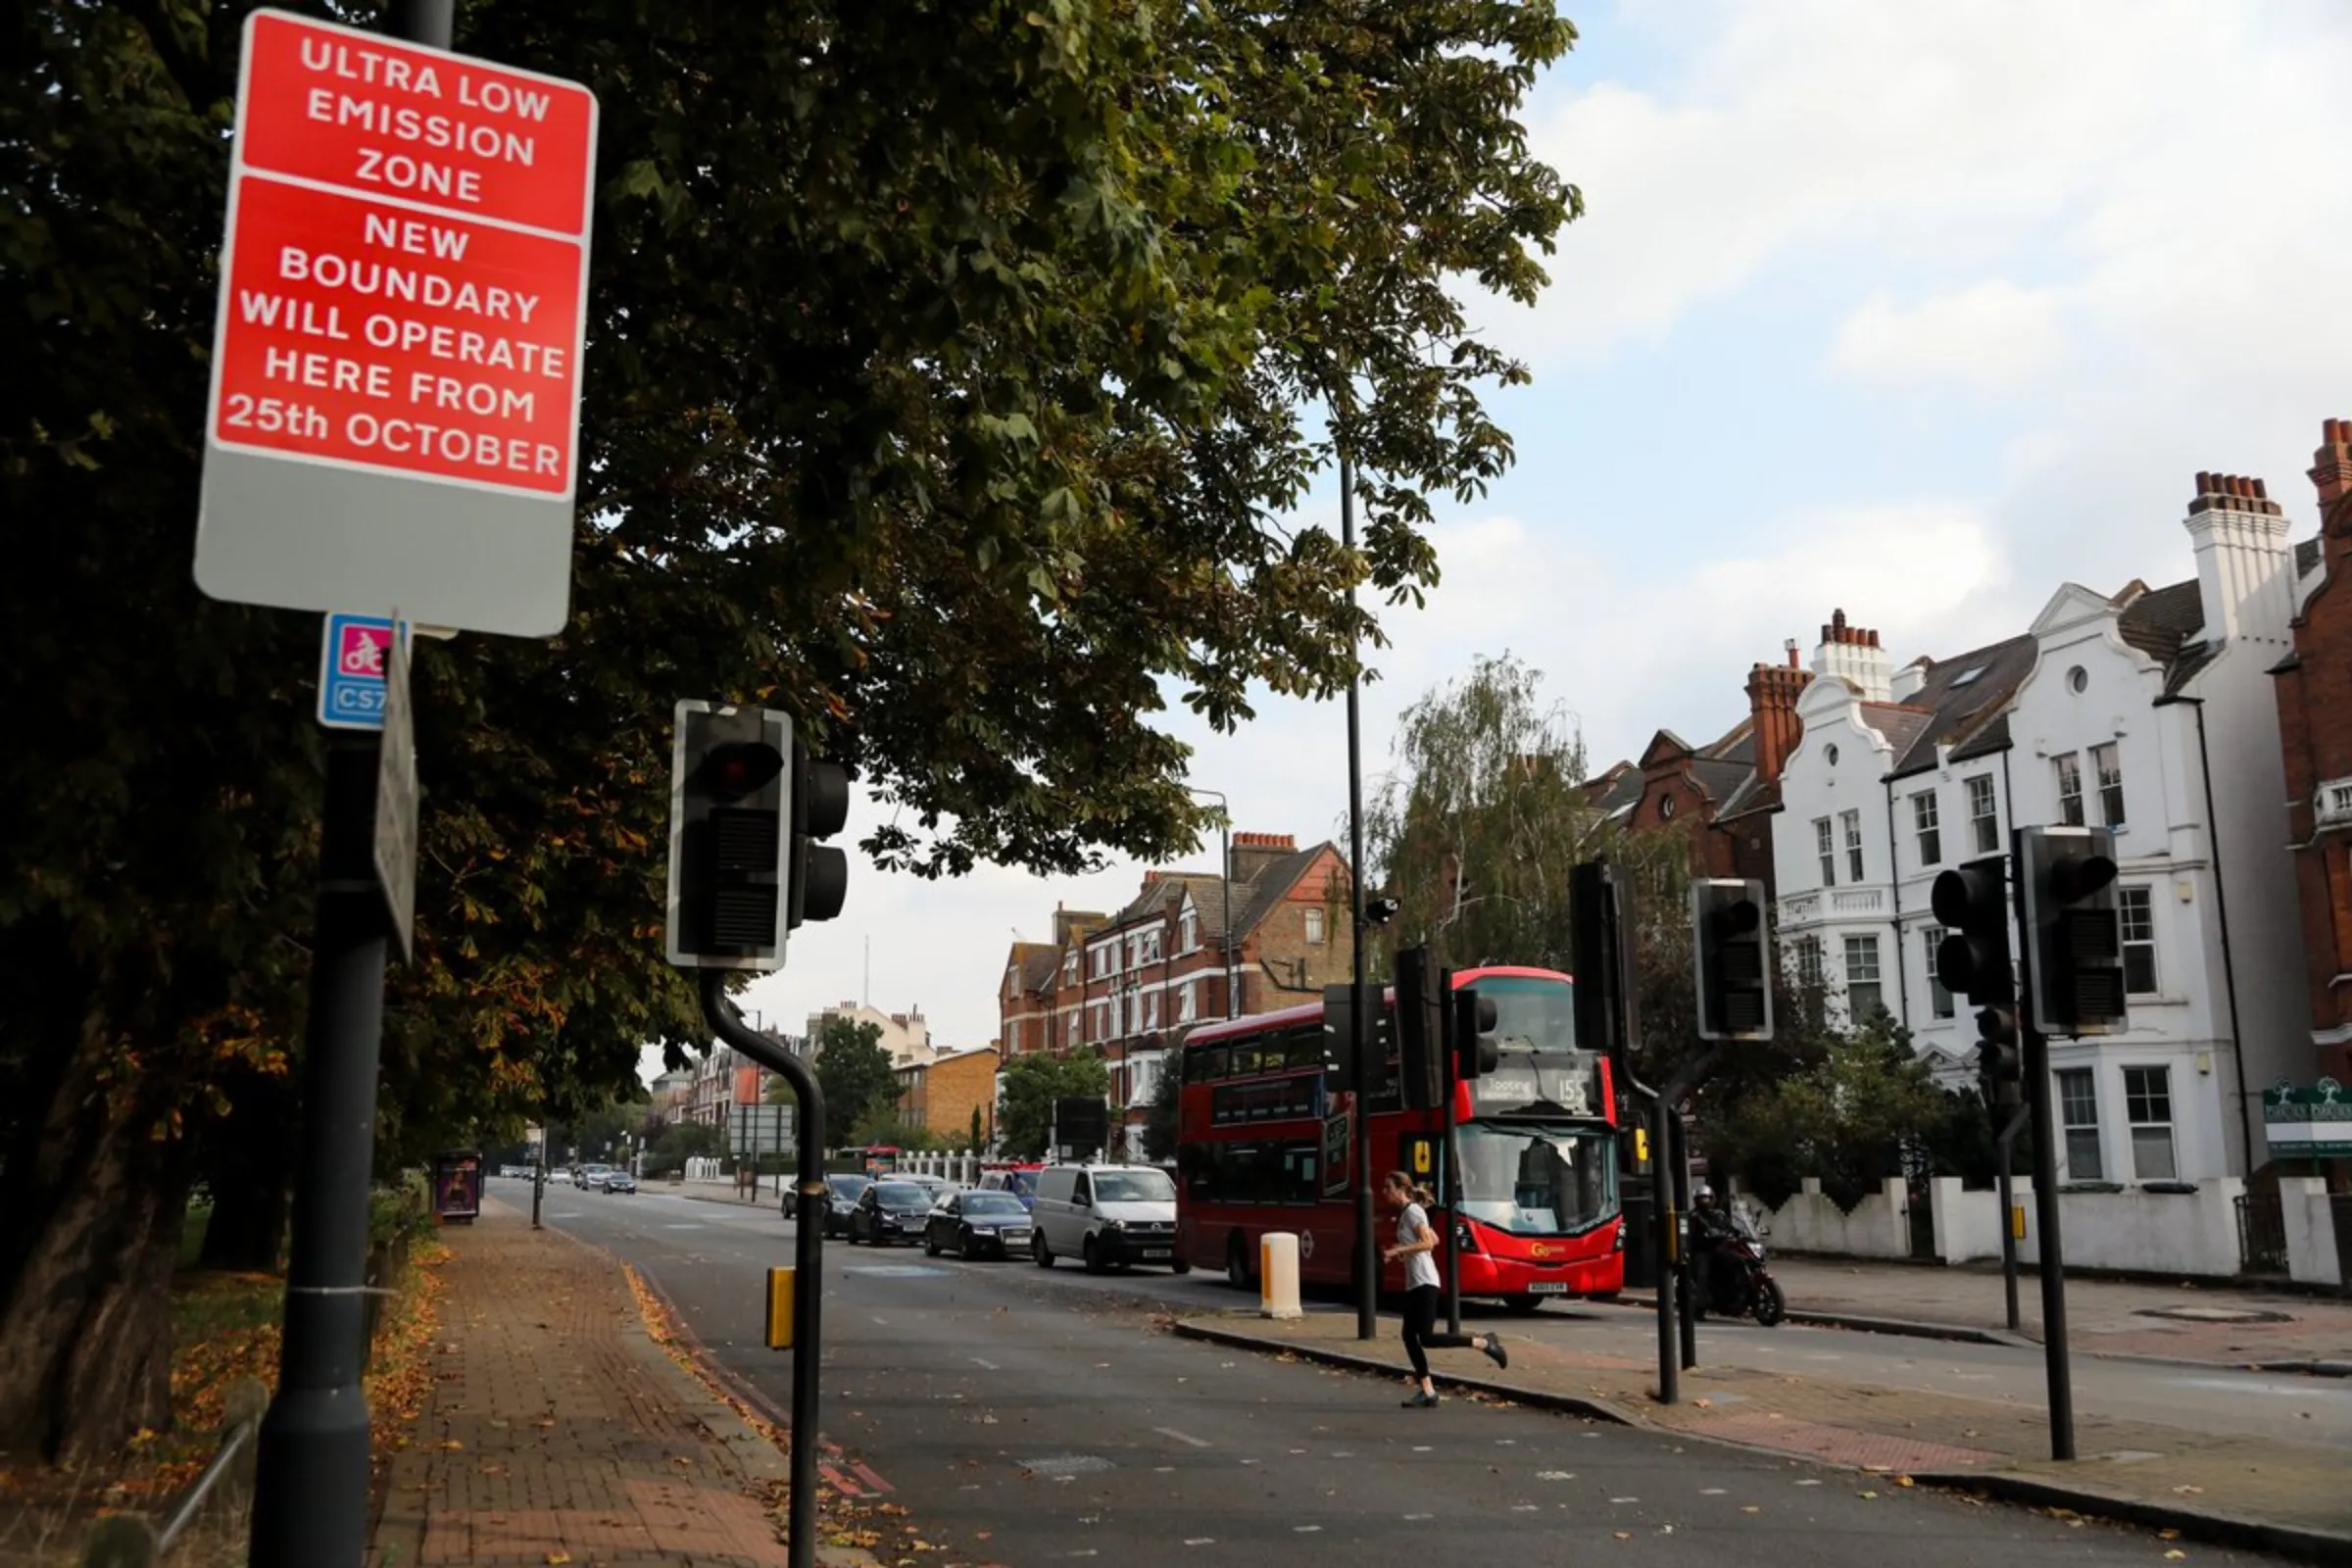 A jogger crosses the road near a London double-decker bus and a sign advising motorists of the expansion of London’s Ultra Low Emissions Zone (ULEZ), aimed at cleaning the city’s air, on October 19, 2021